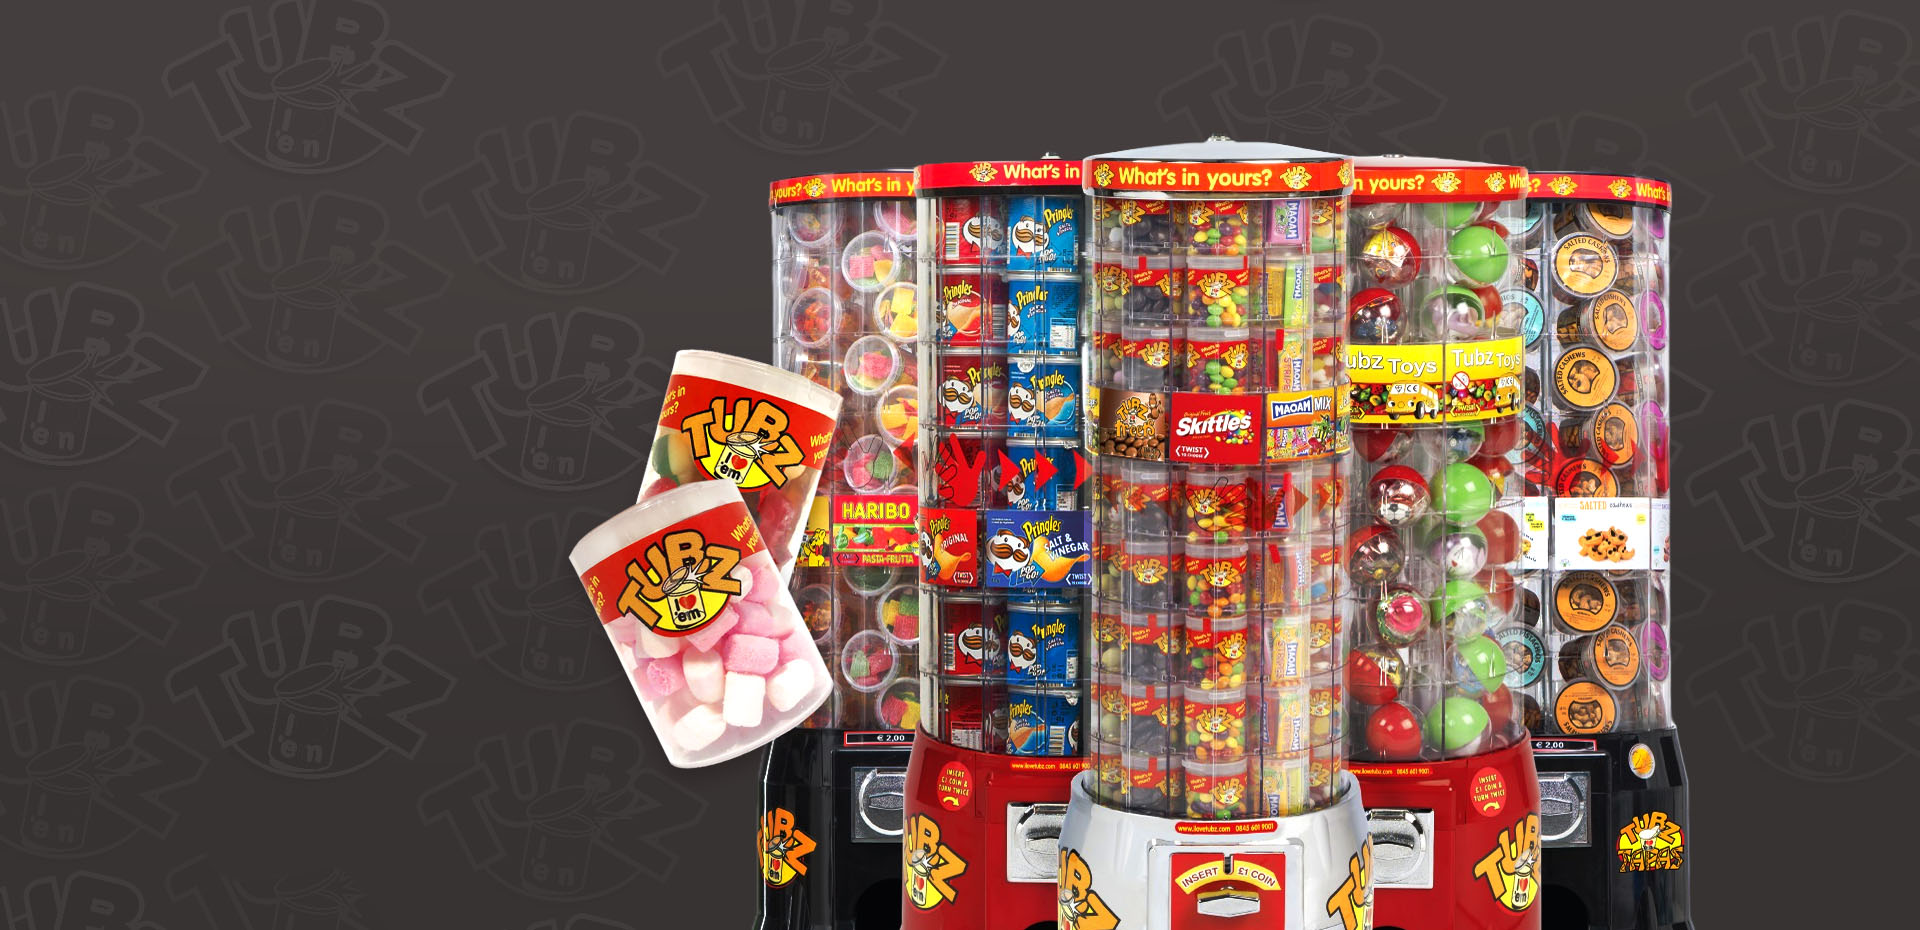 Installers Of Sweets Vending Machines For Soft Play Establishments Market Harbrough